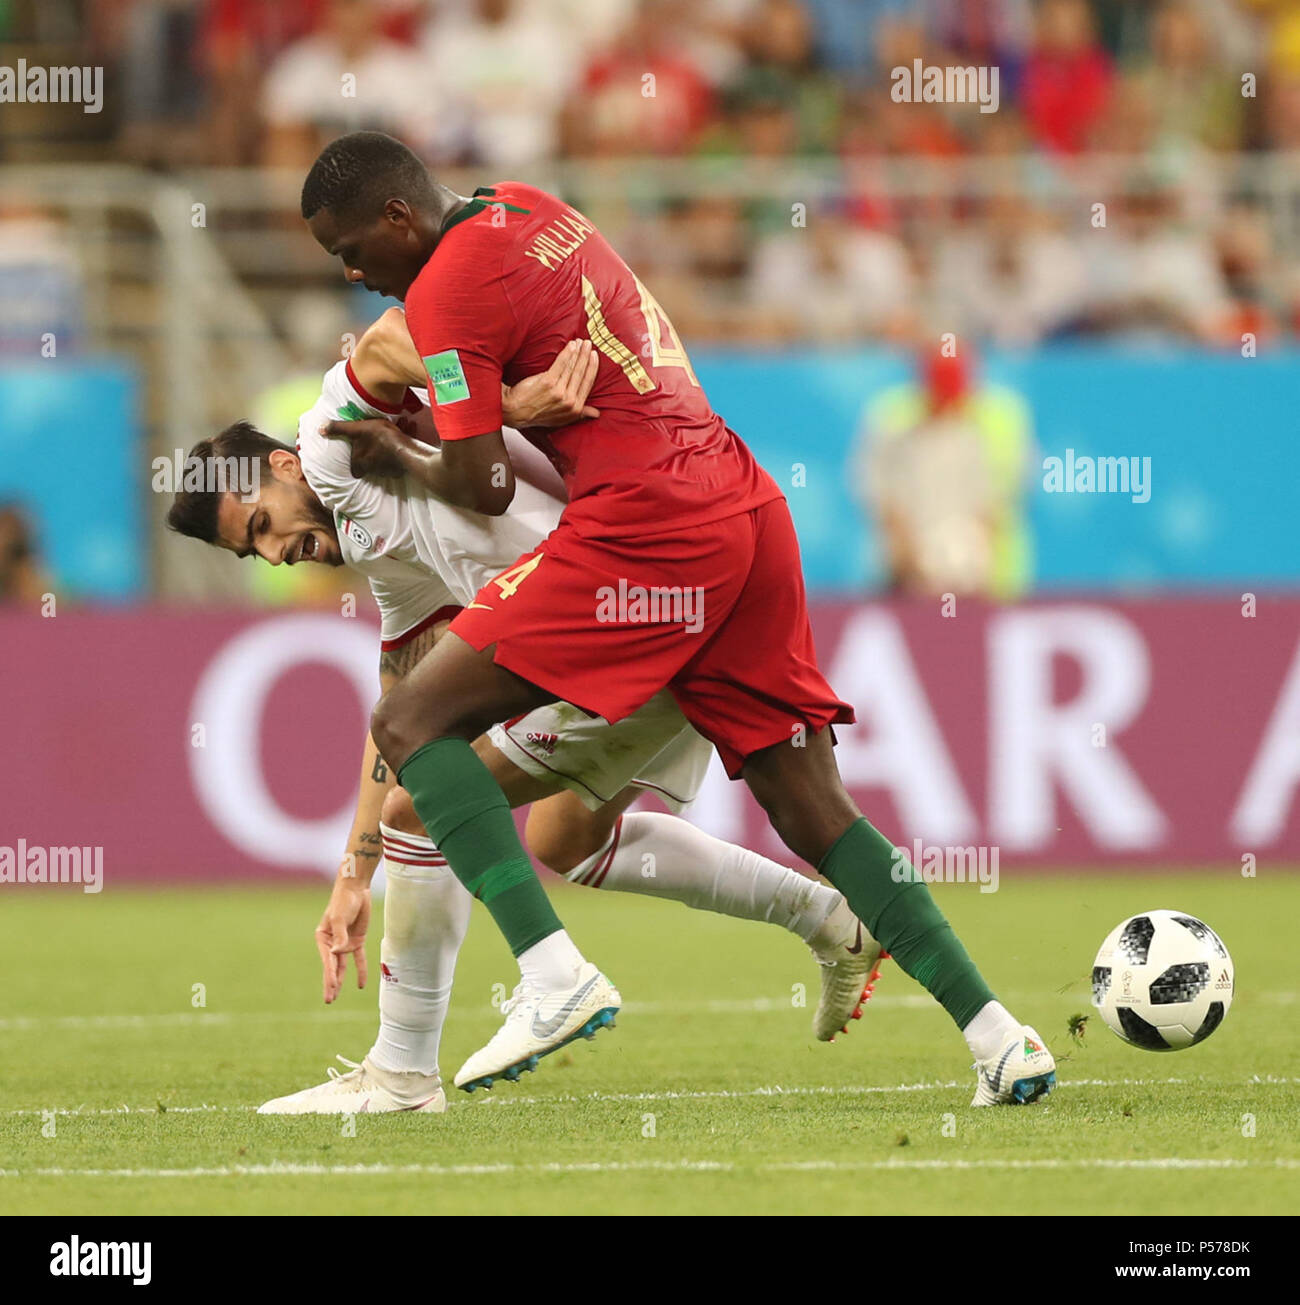 (180625) -- SARANSK, June 25, 2018 (Xinhua) -- William Carvalho (R) of Portugal competes during the 2018 FIFA World Cup Group B match between Iran and Portugal in Saransk, Russia, June 25, 2018. (Xinhua/Fei Maohua) Stock Photo